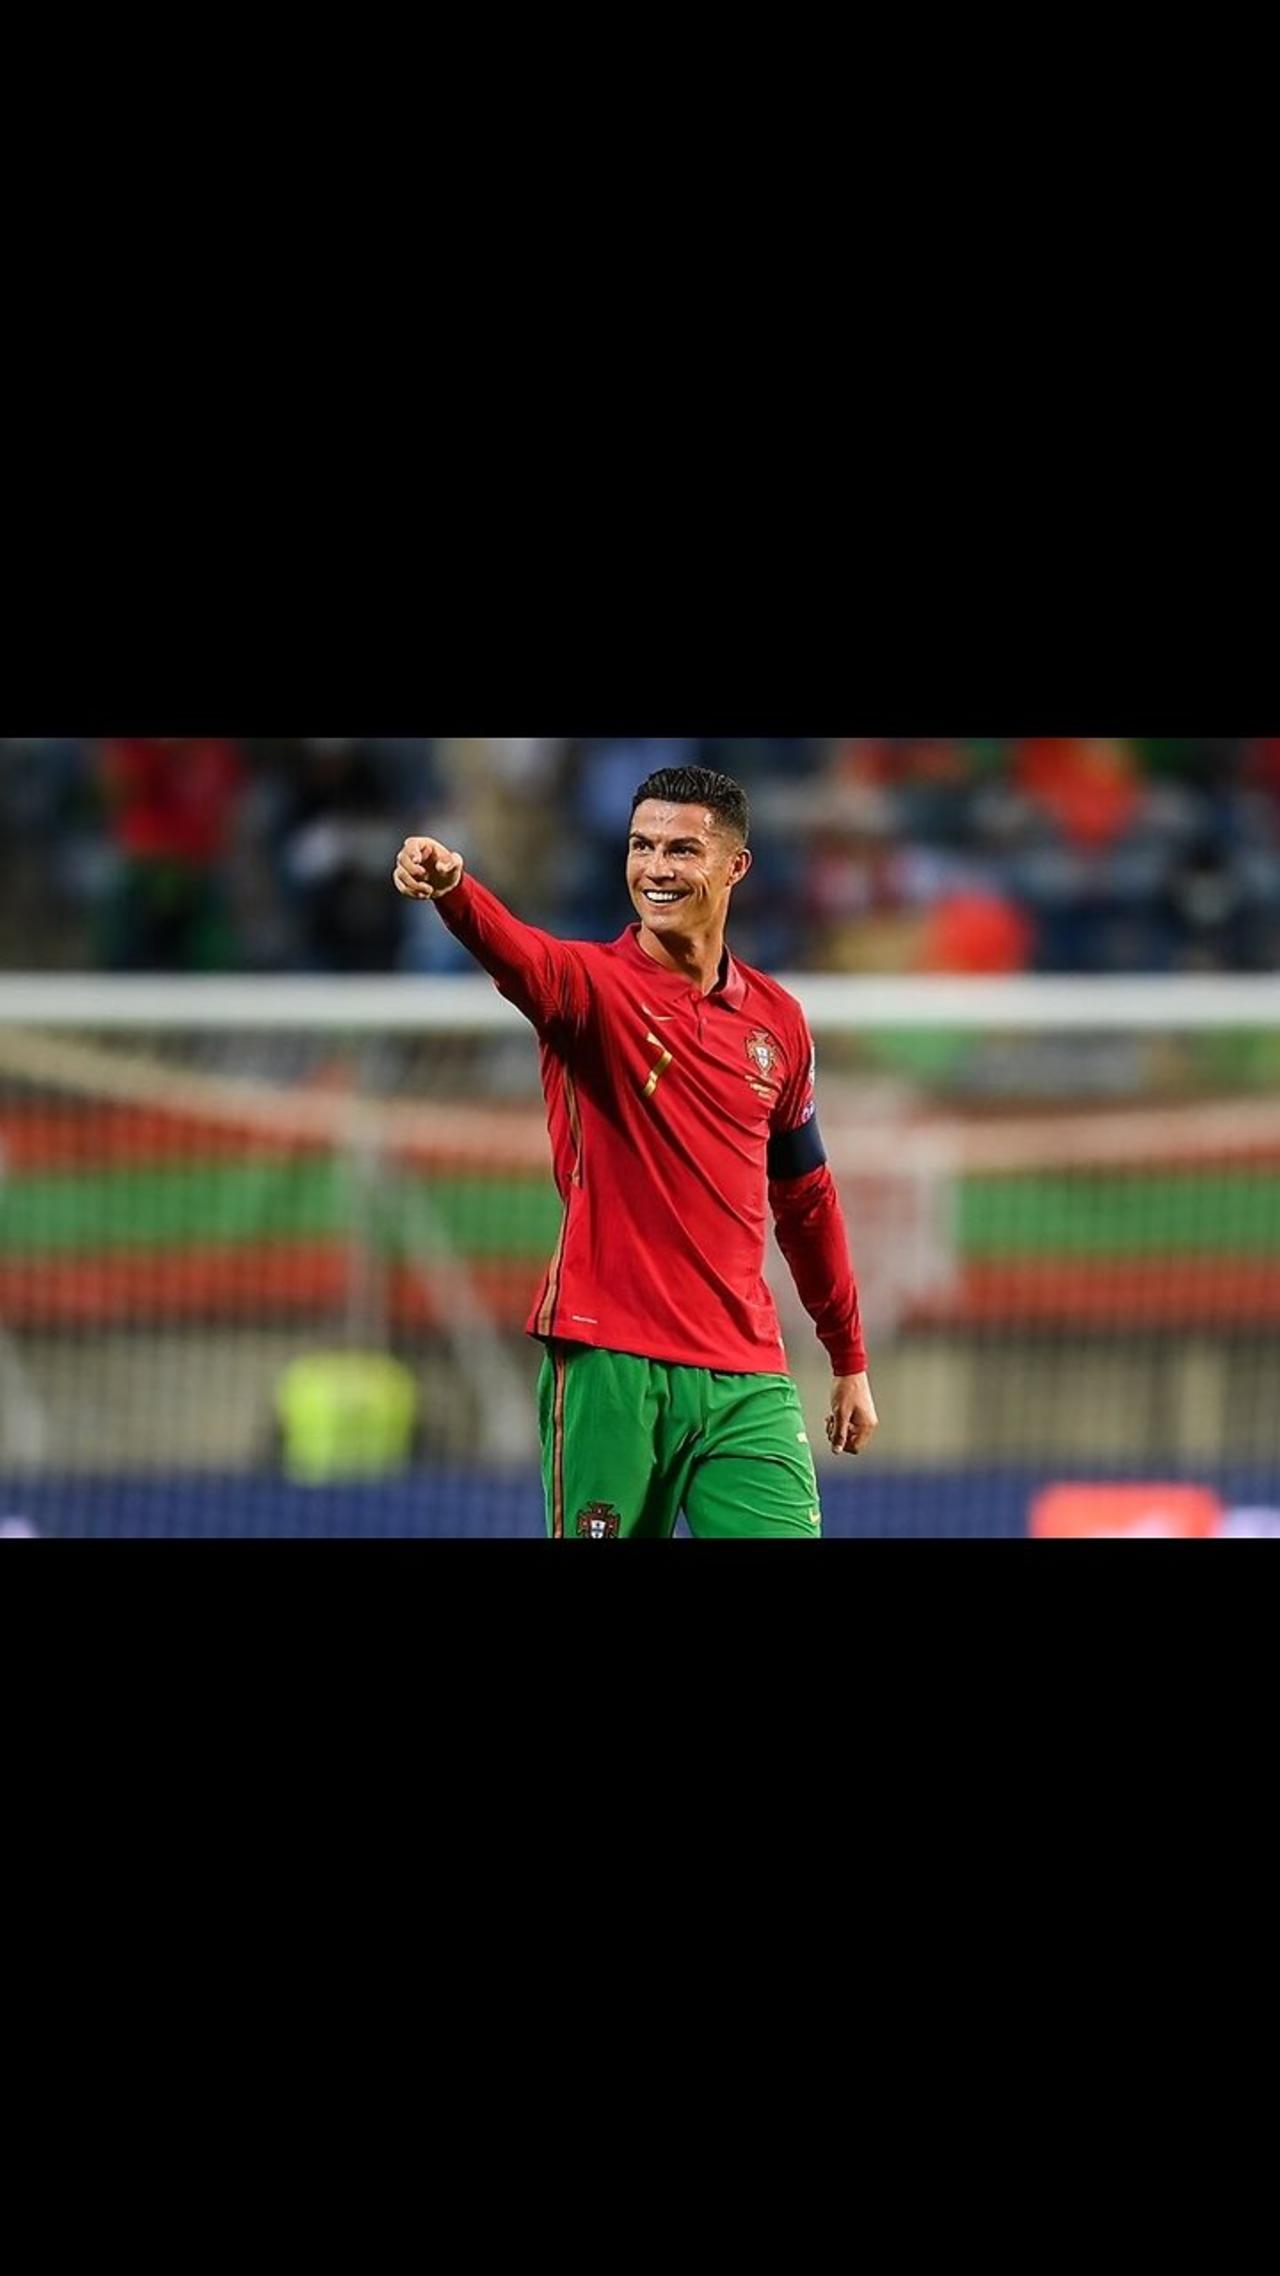 CR7 cried after the match